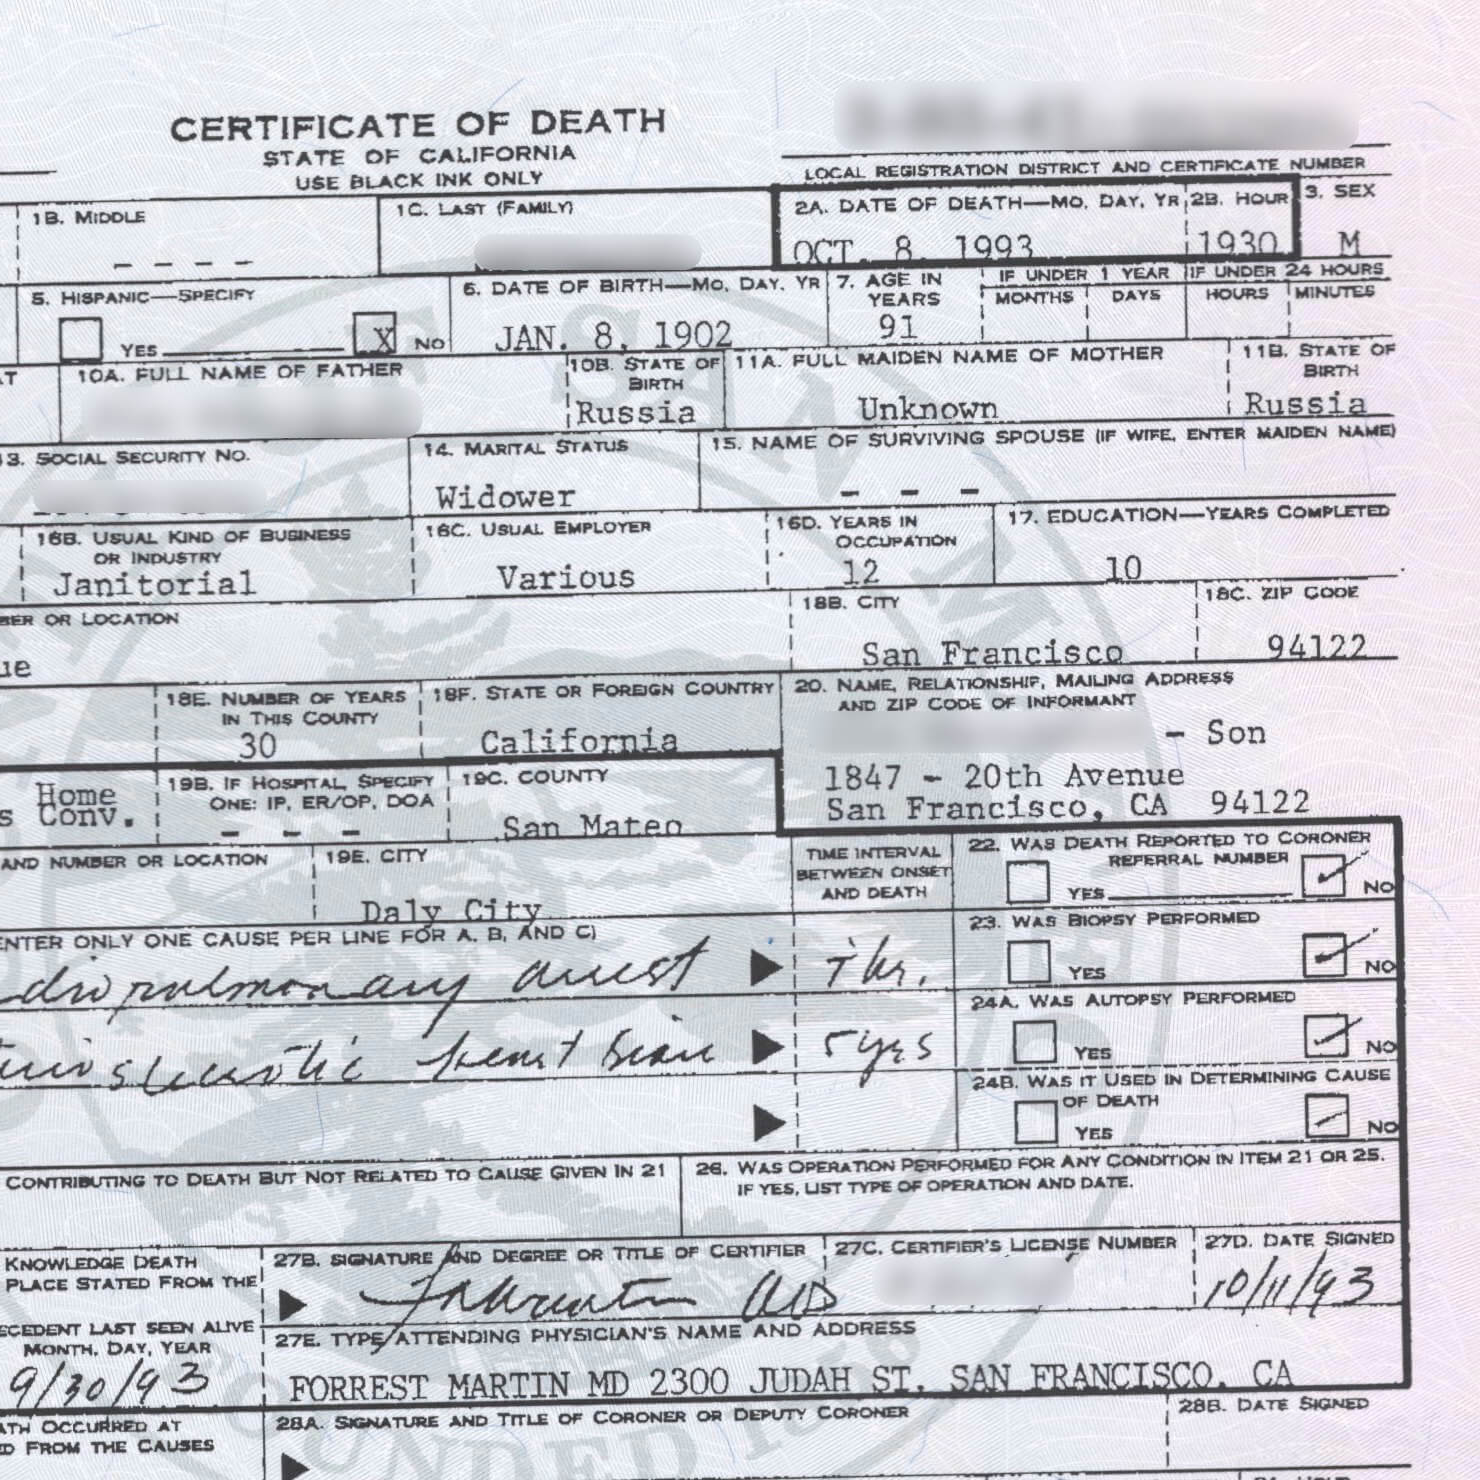 A fragment of a death certificate issued in the US